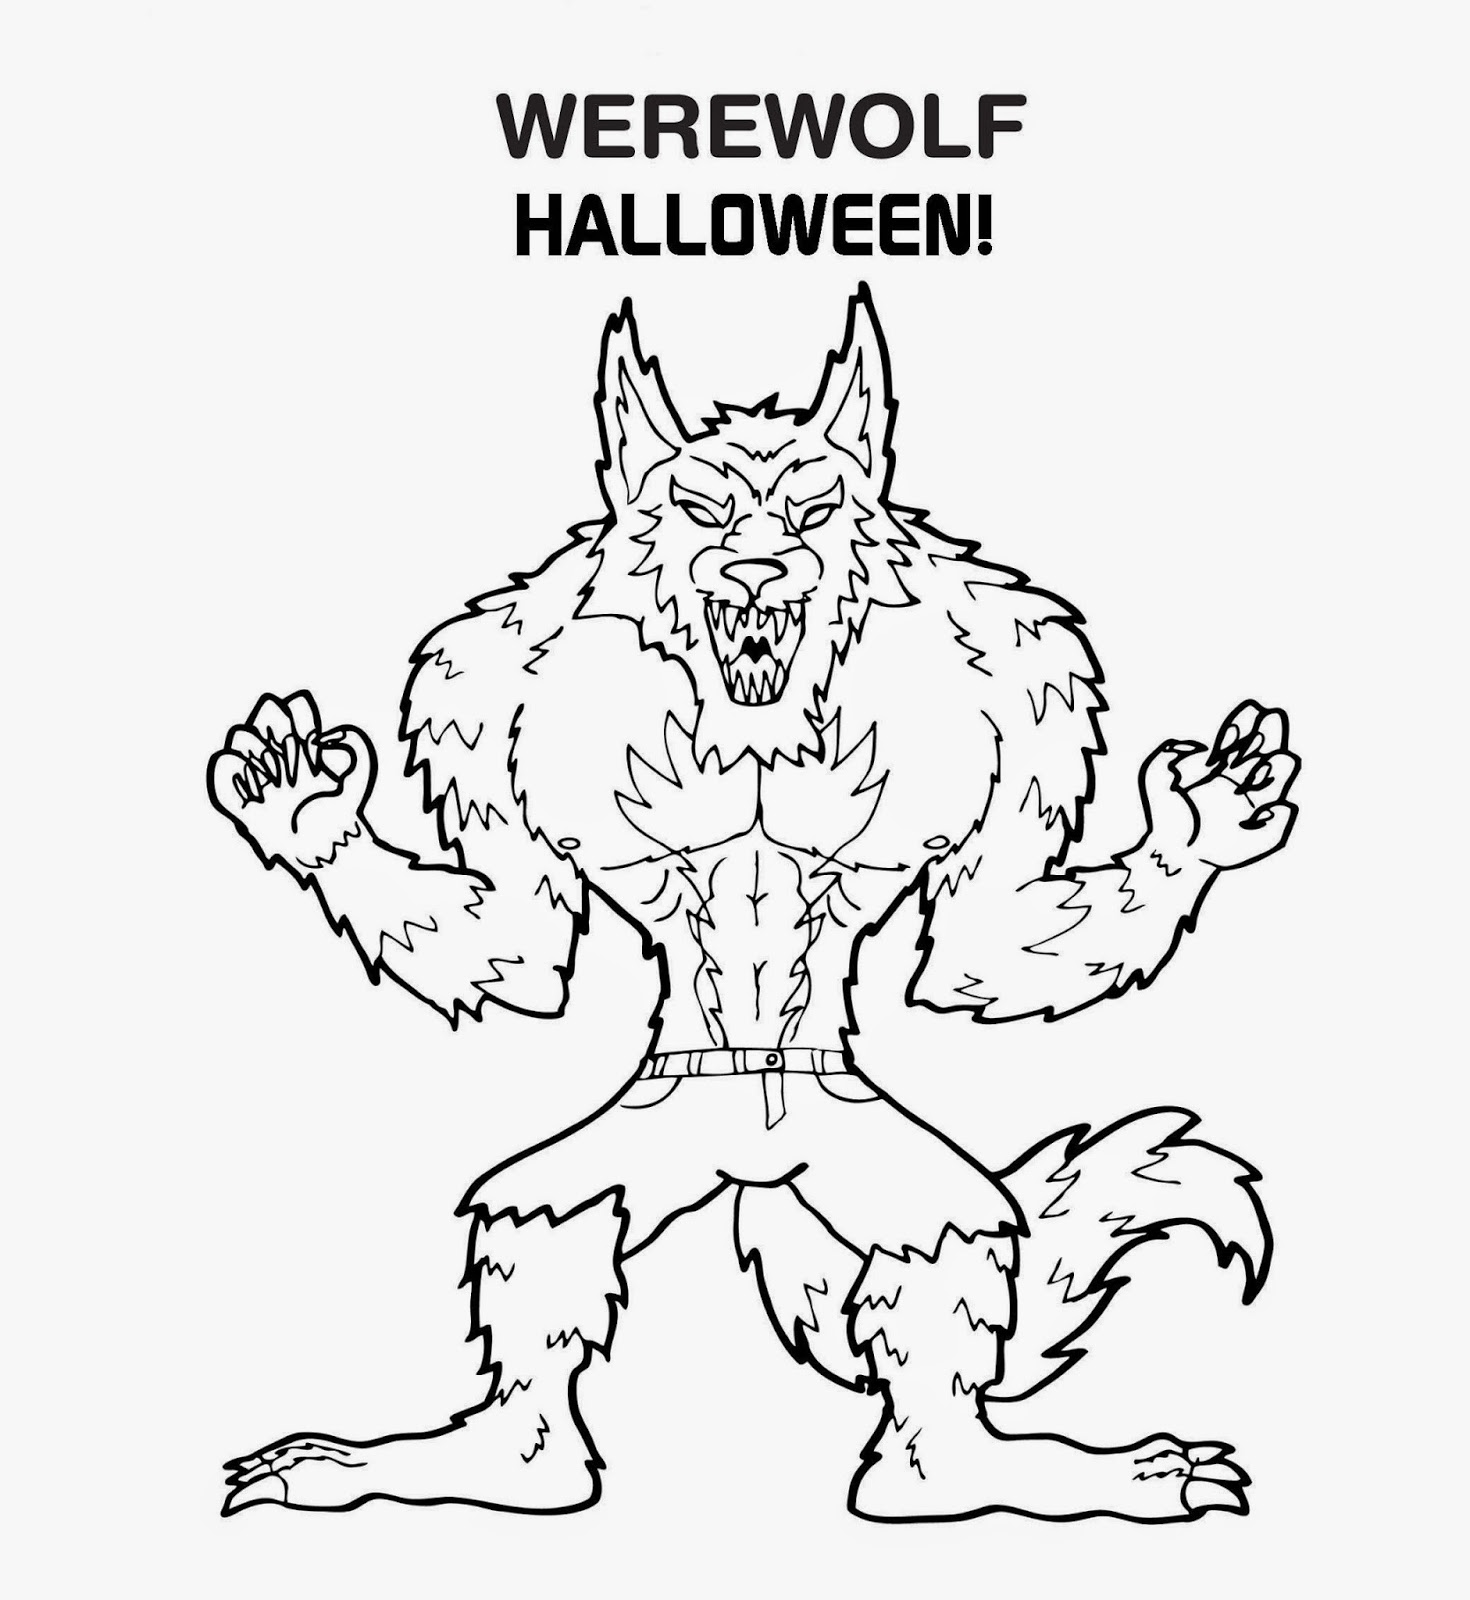 Free Werewolf Halloween Coloring Pages